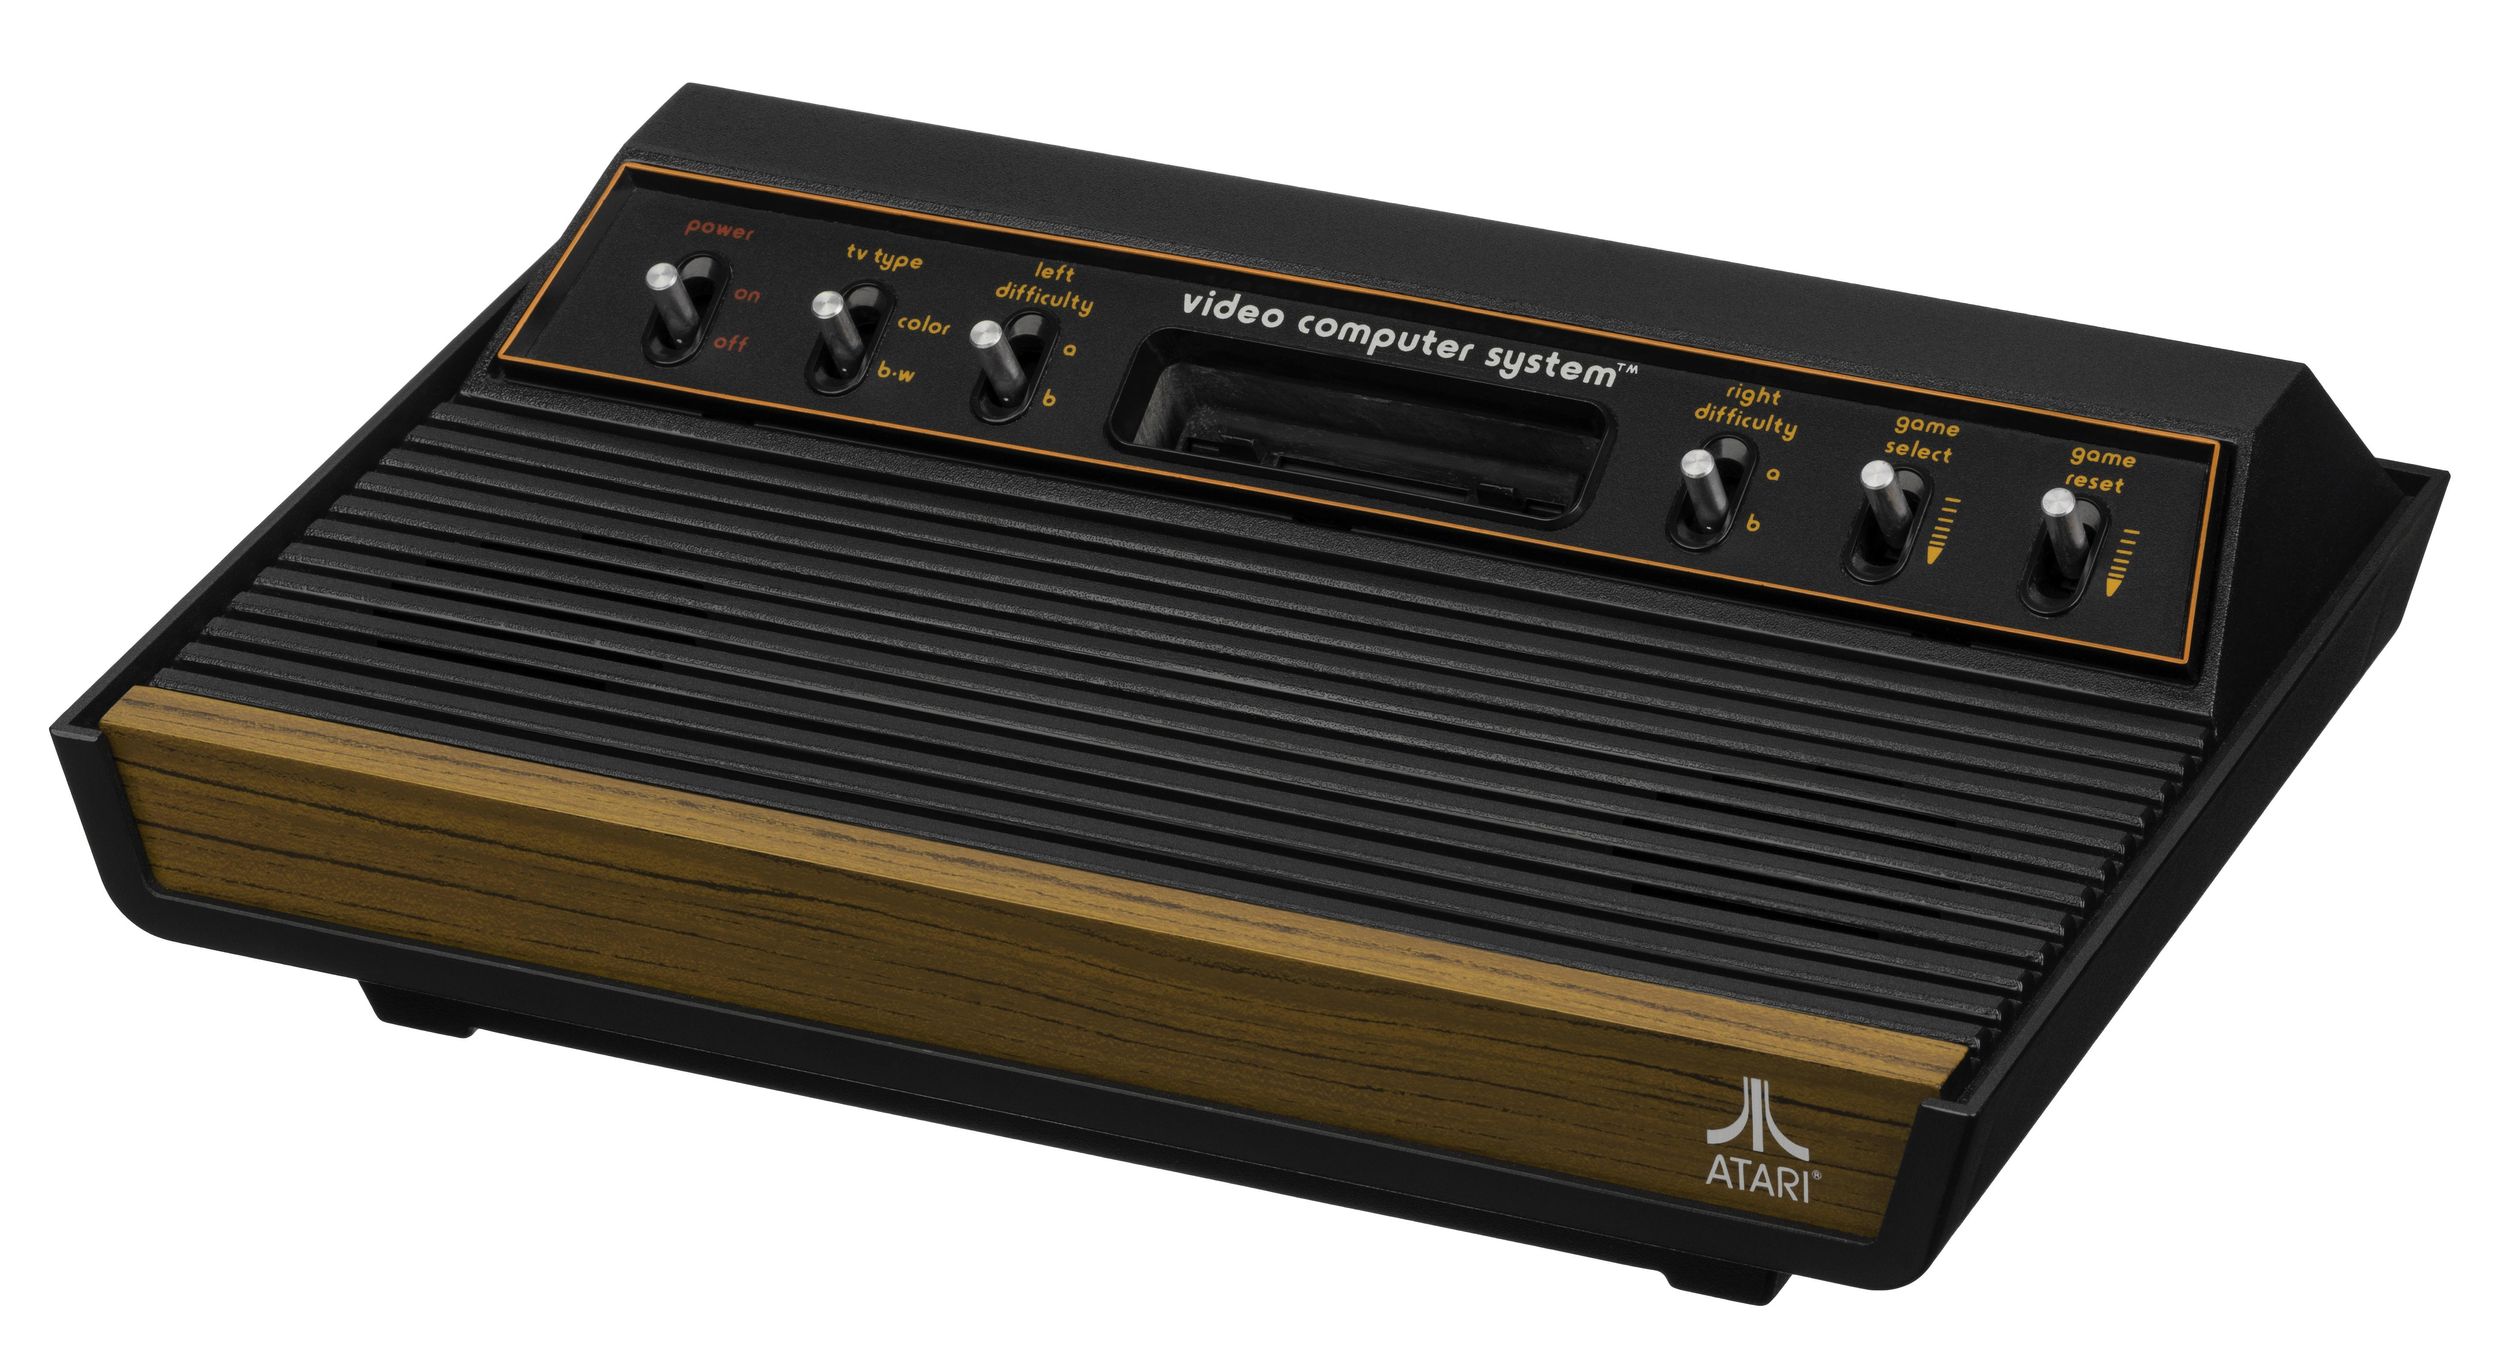 Brown and black gaming console with Atari logo labeled video computer system